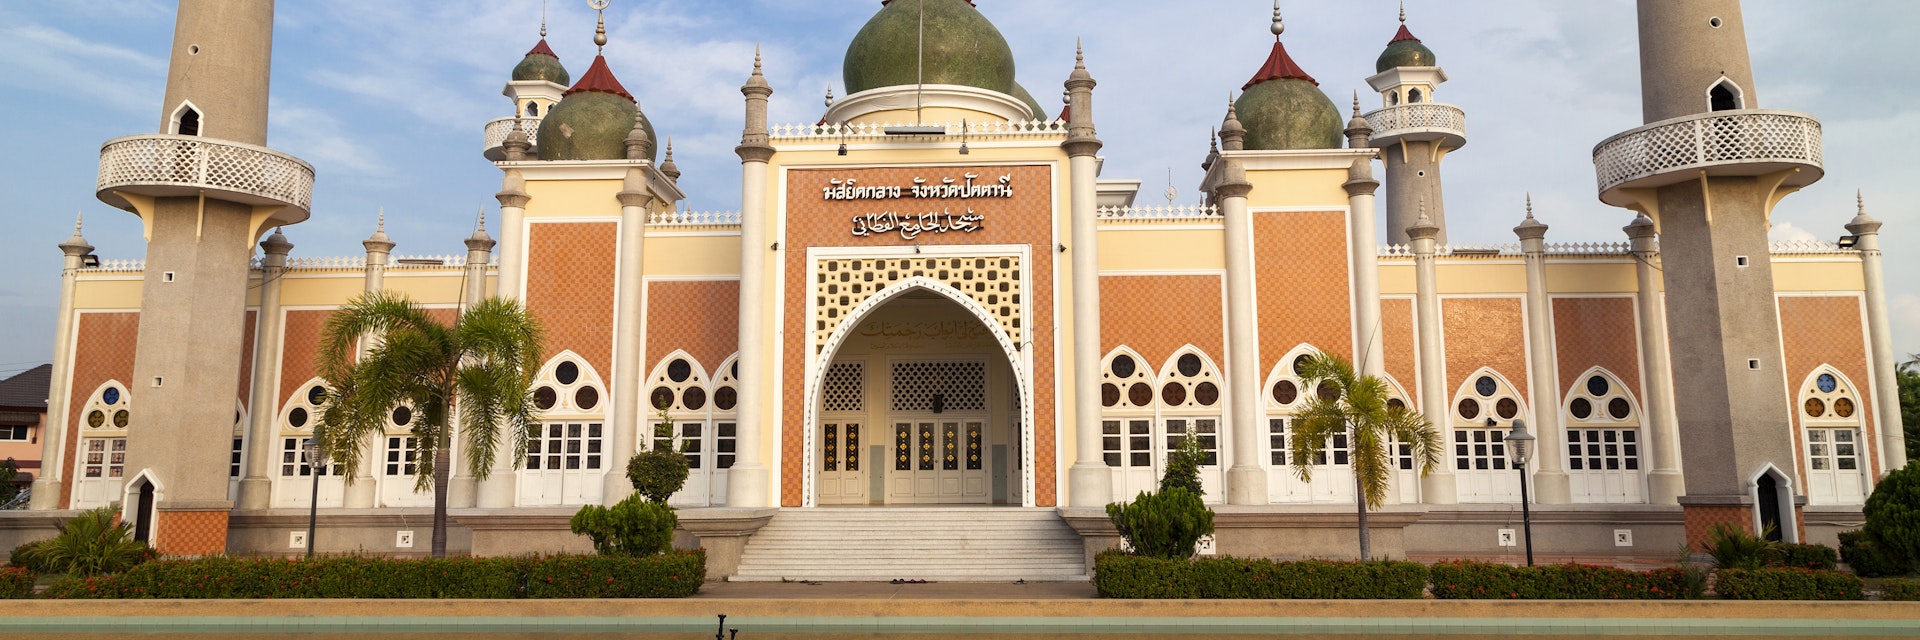 Pattani central mosque with reflection in Thailand